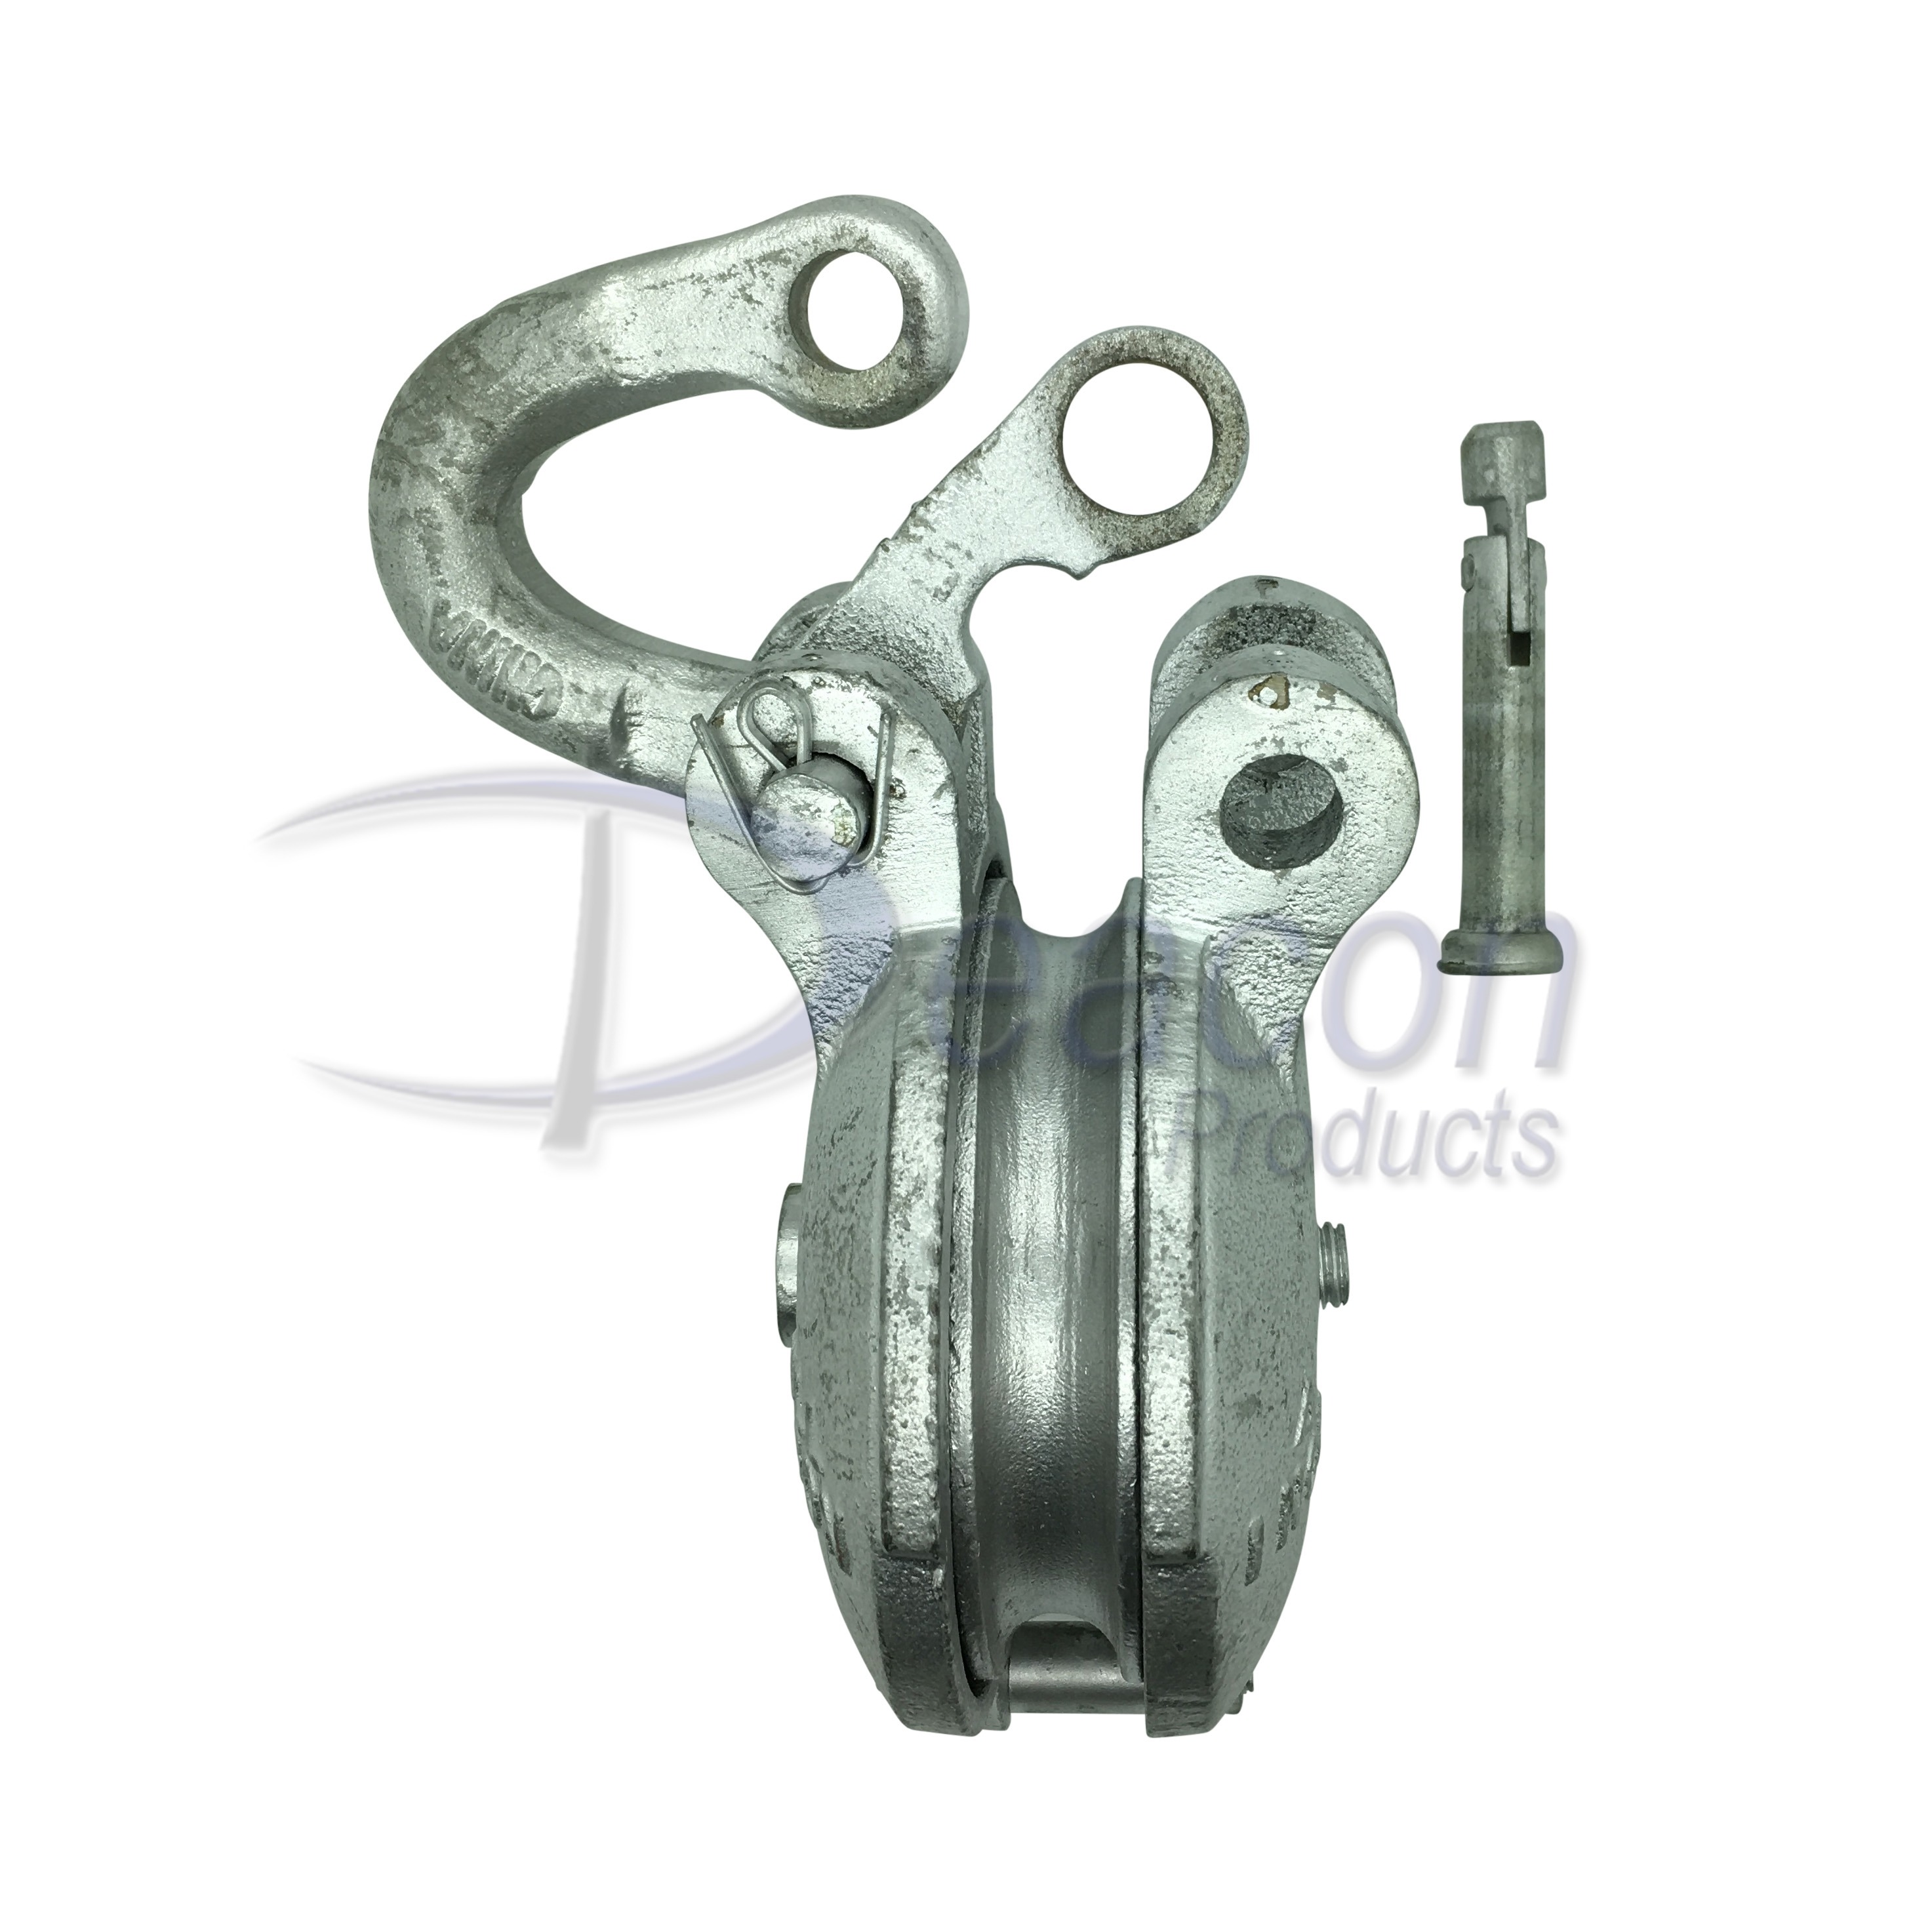 galvanized-forestry-yarding-pulley-block (3)